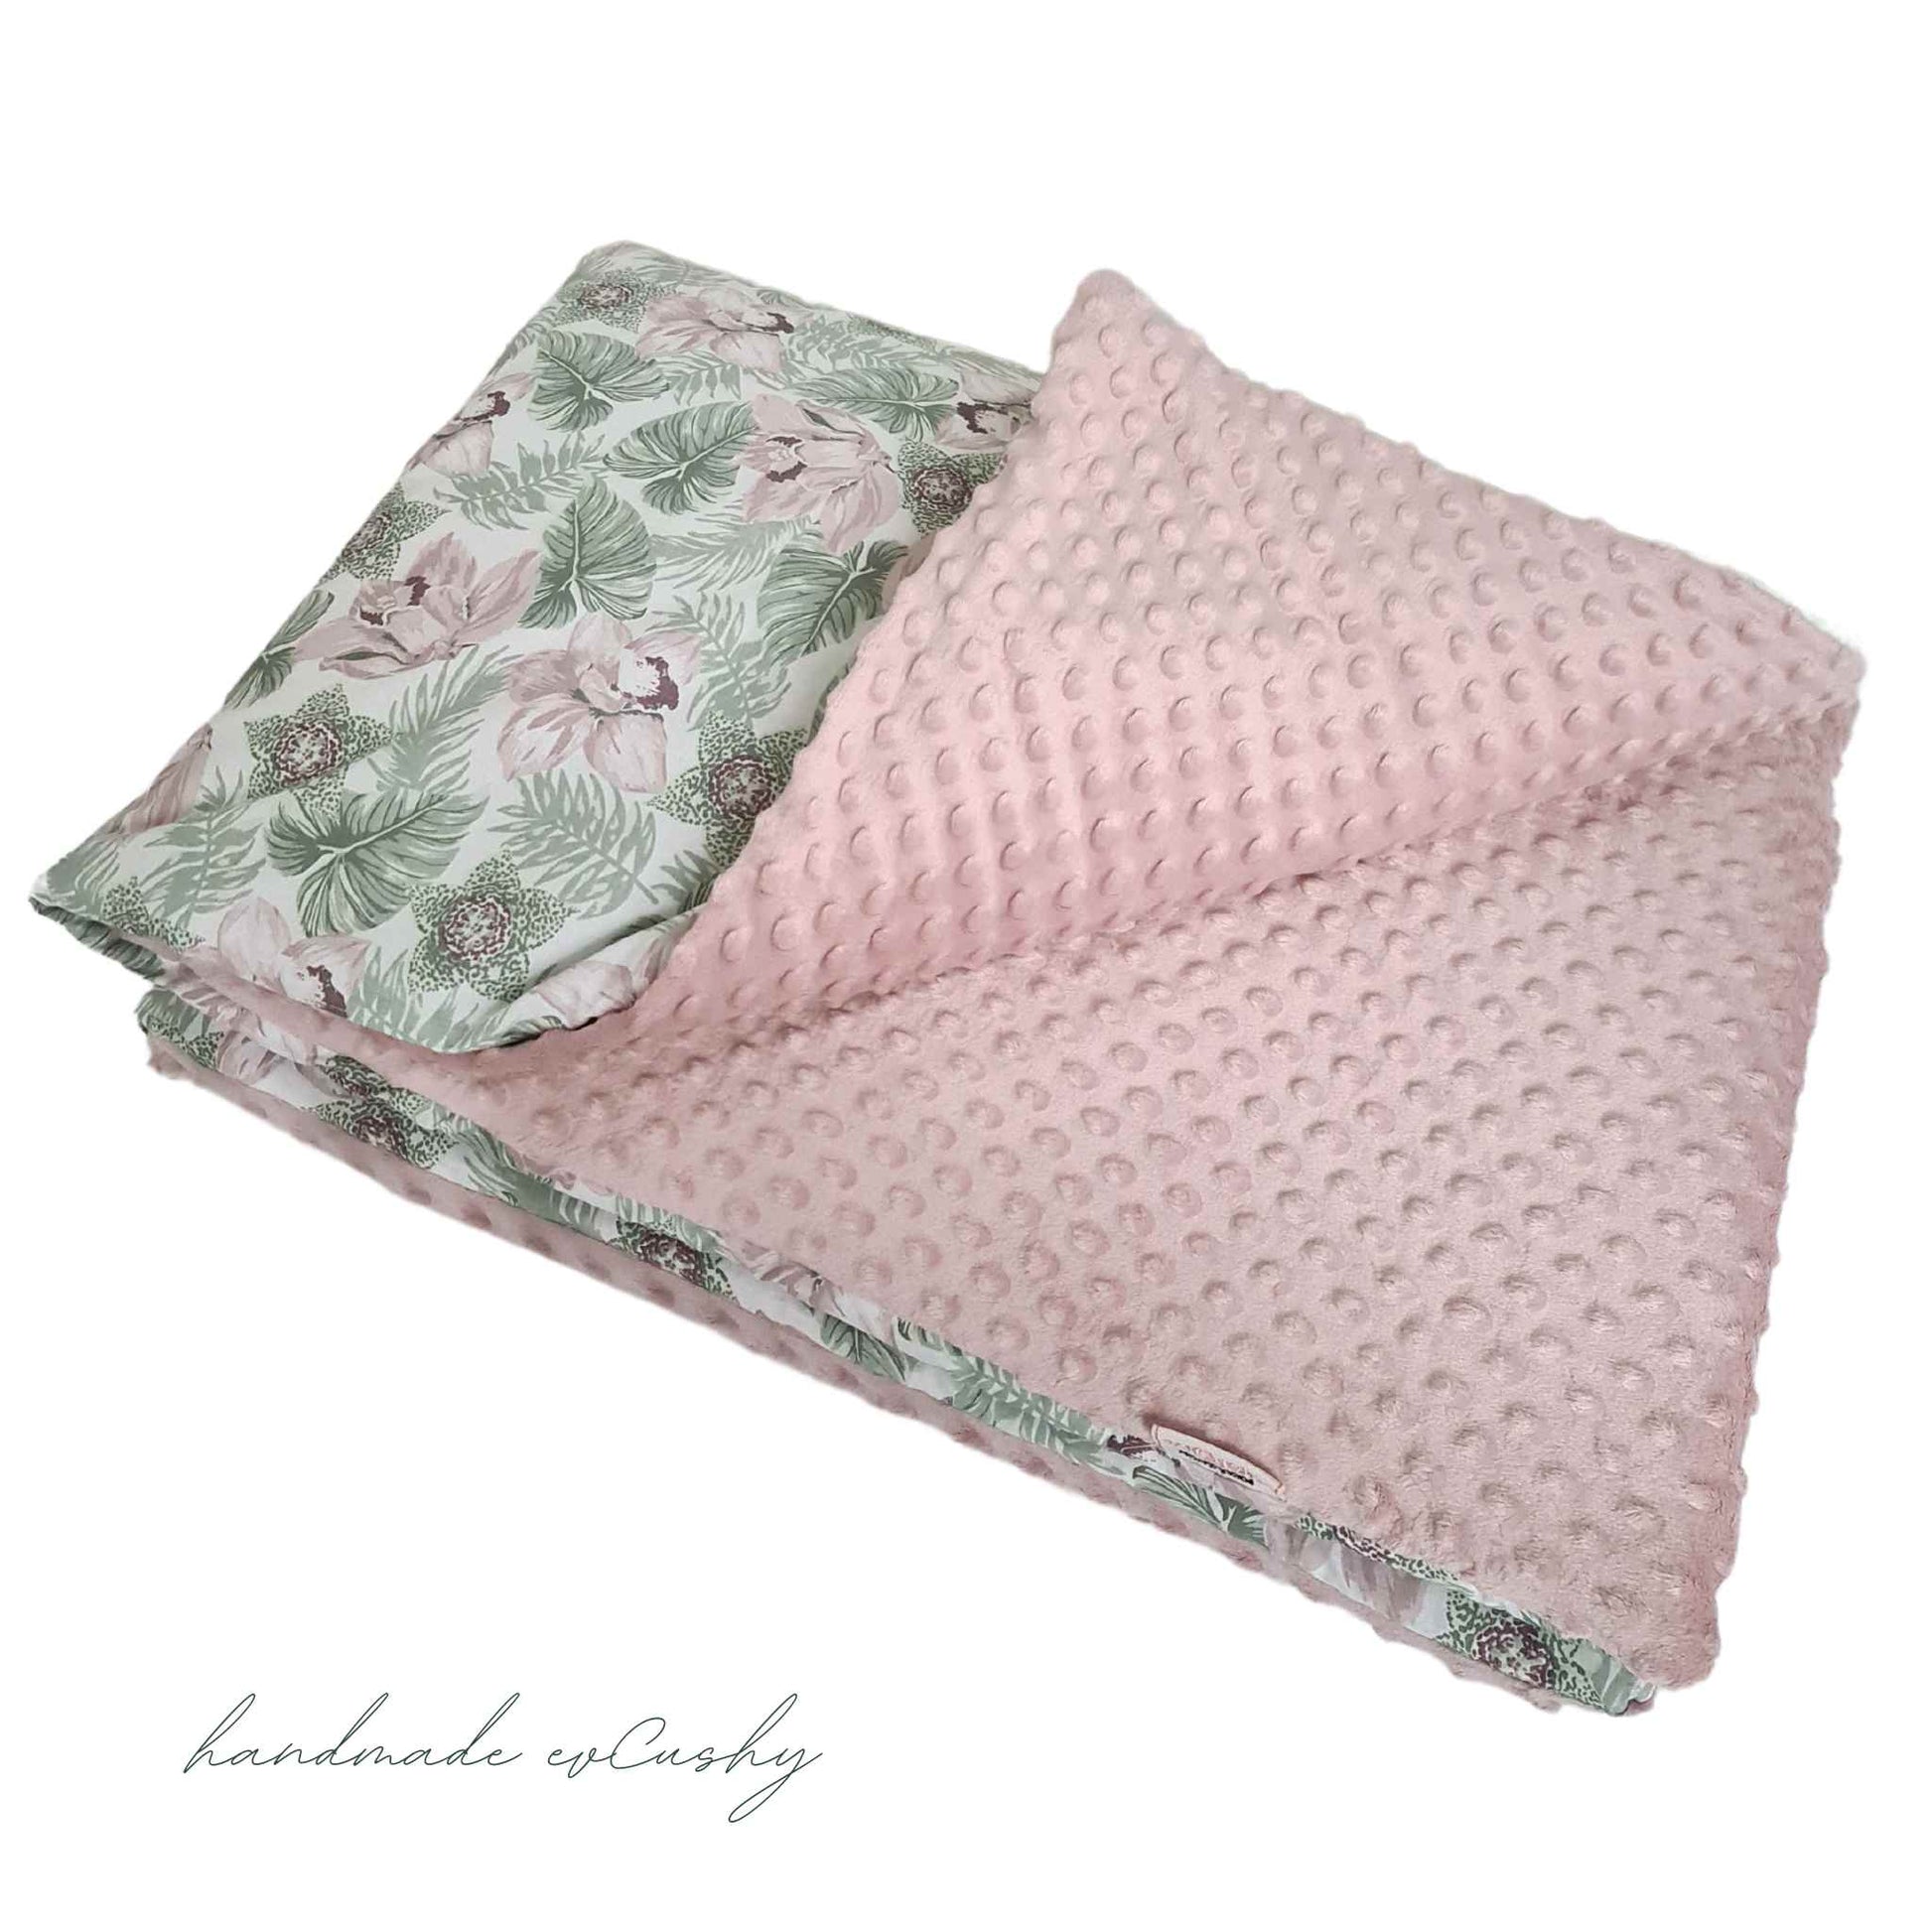 warm blanket for baby girl bed dimple fleece pink and floral cotton sage green